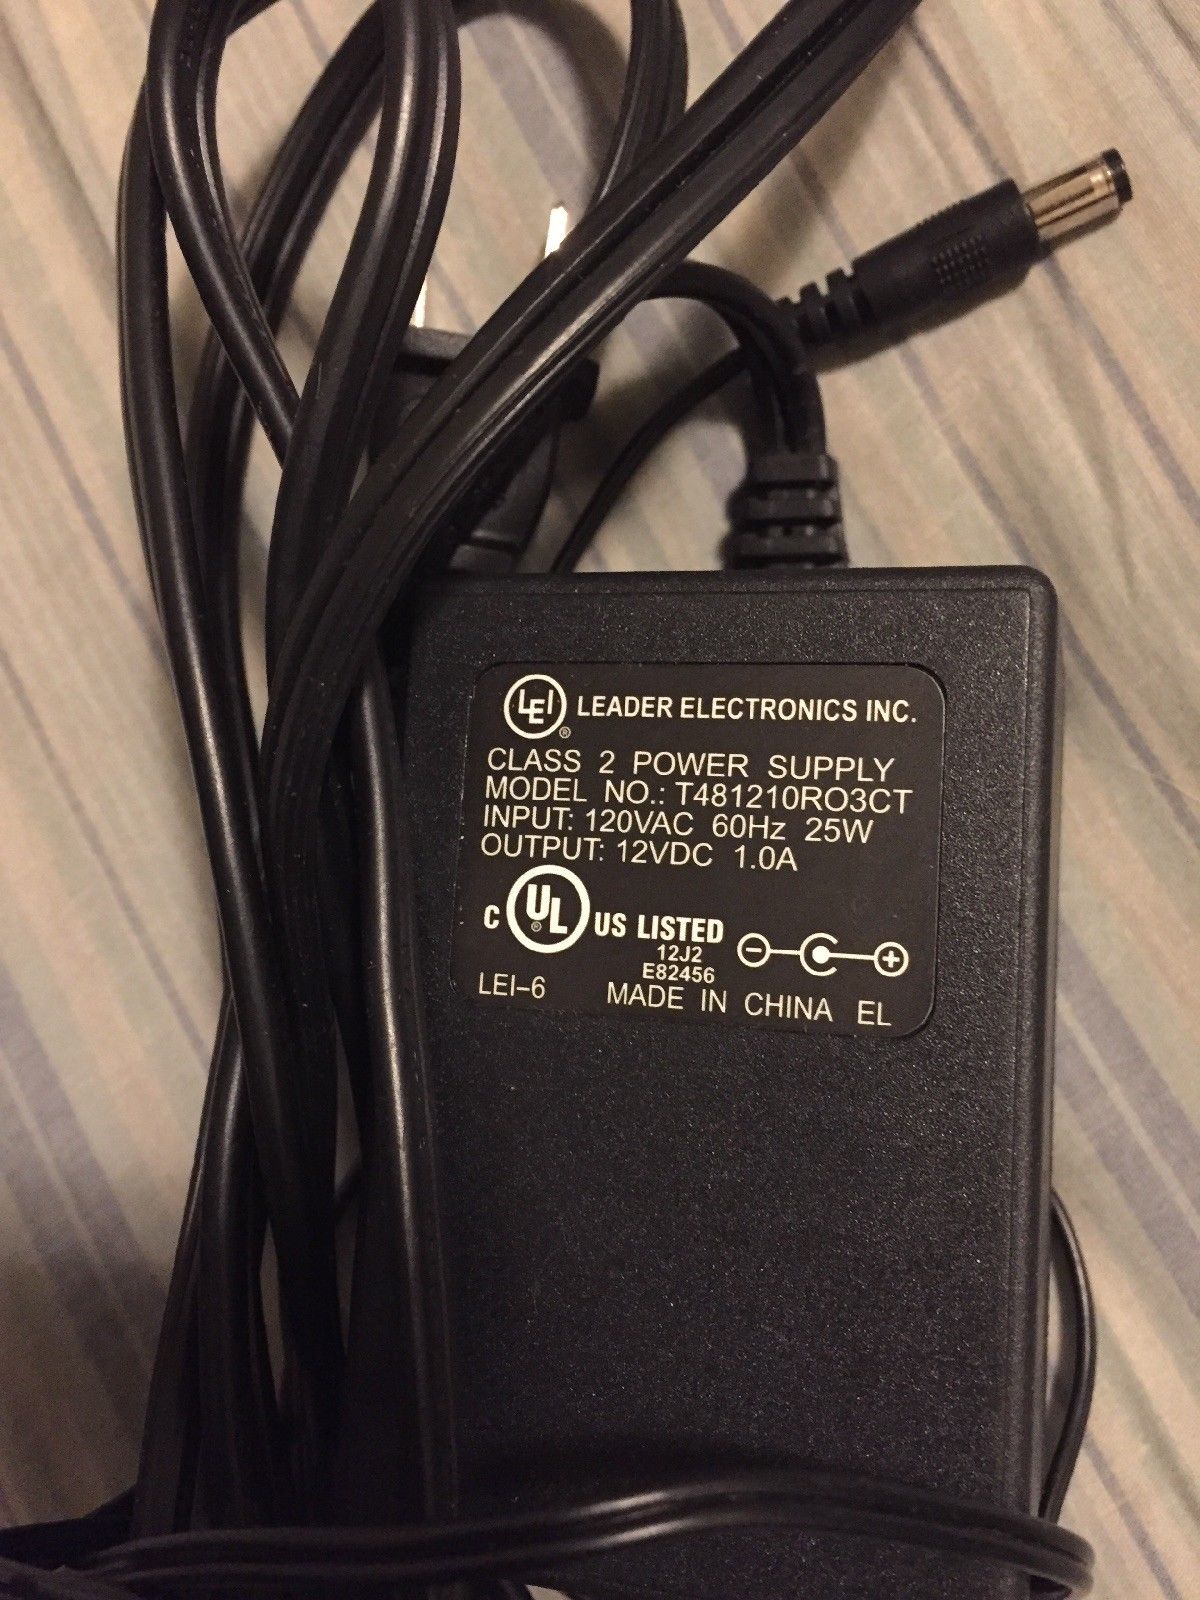 New Misc 12vdc 1.0a Power Adapter Cord LEI T481210RO3CT ac adapter